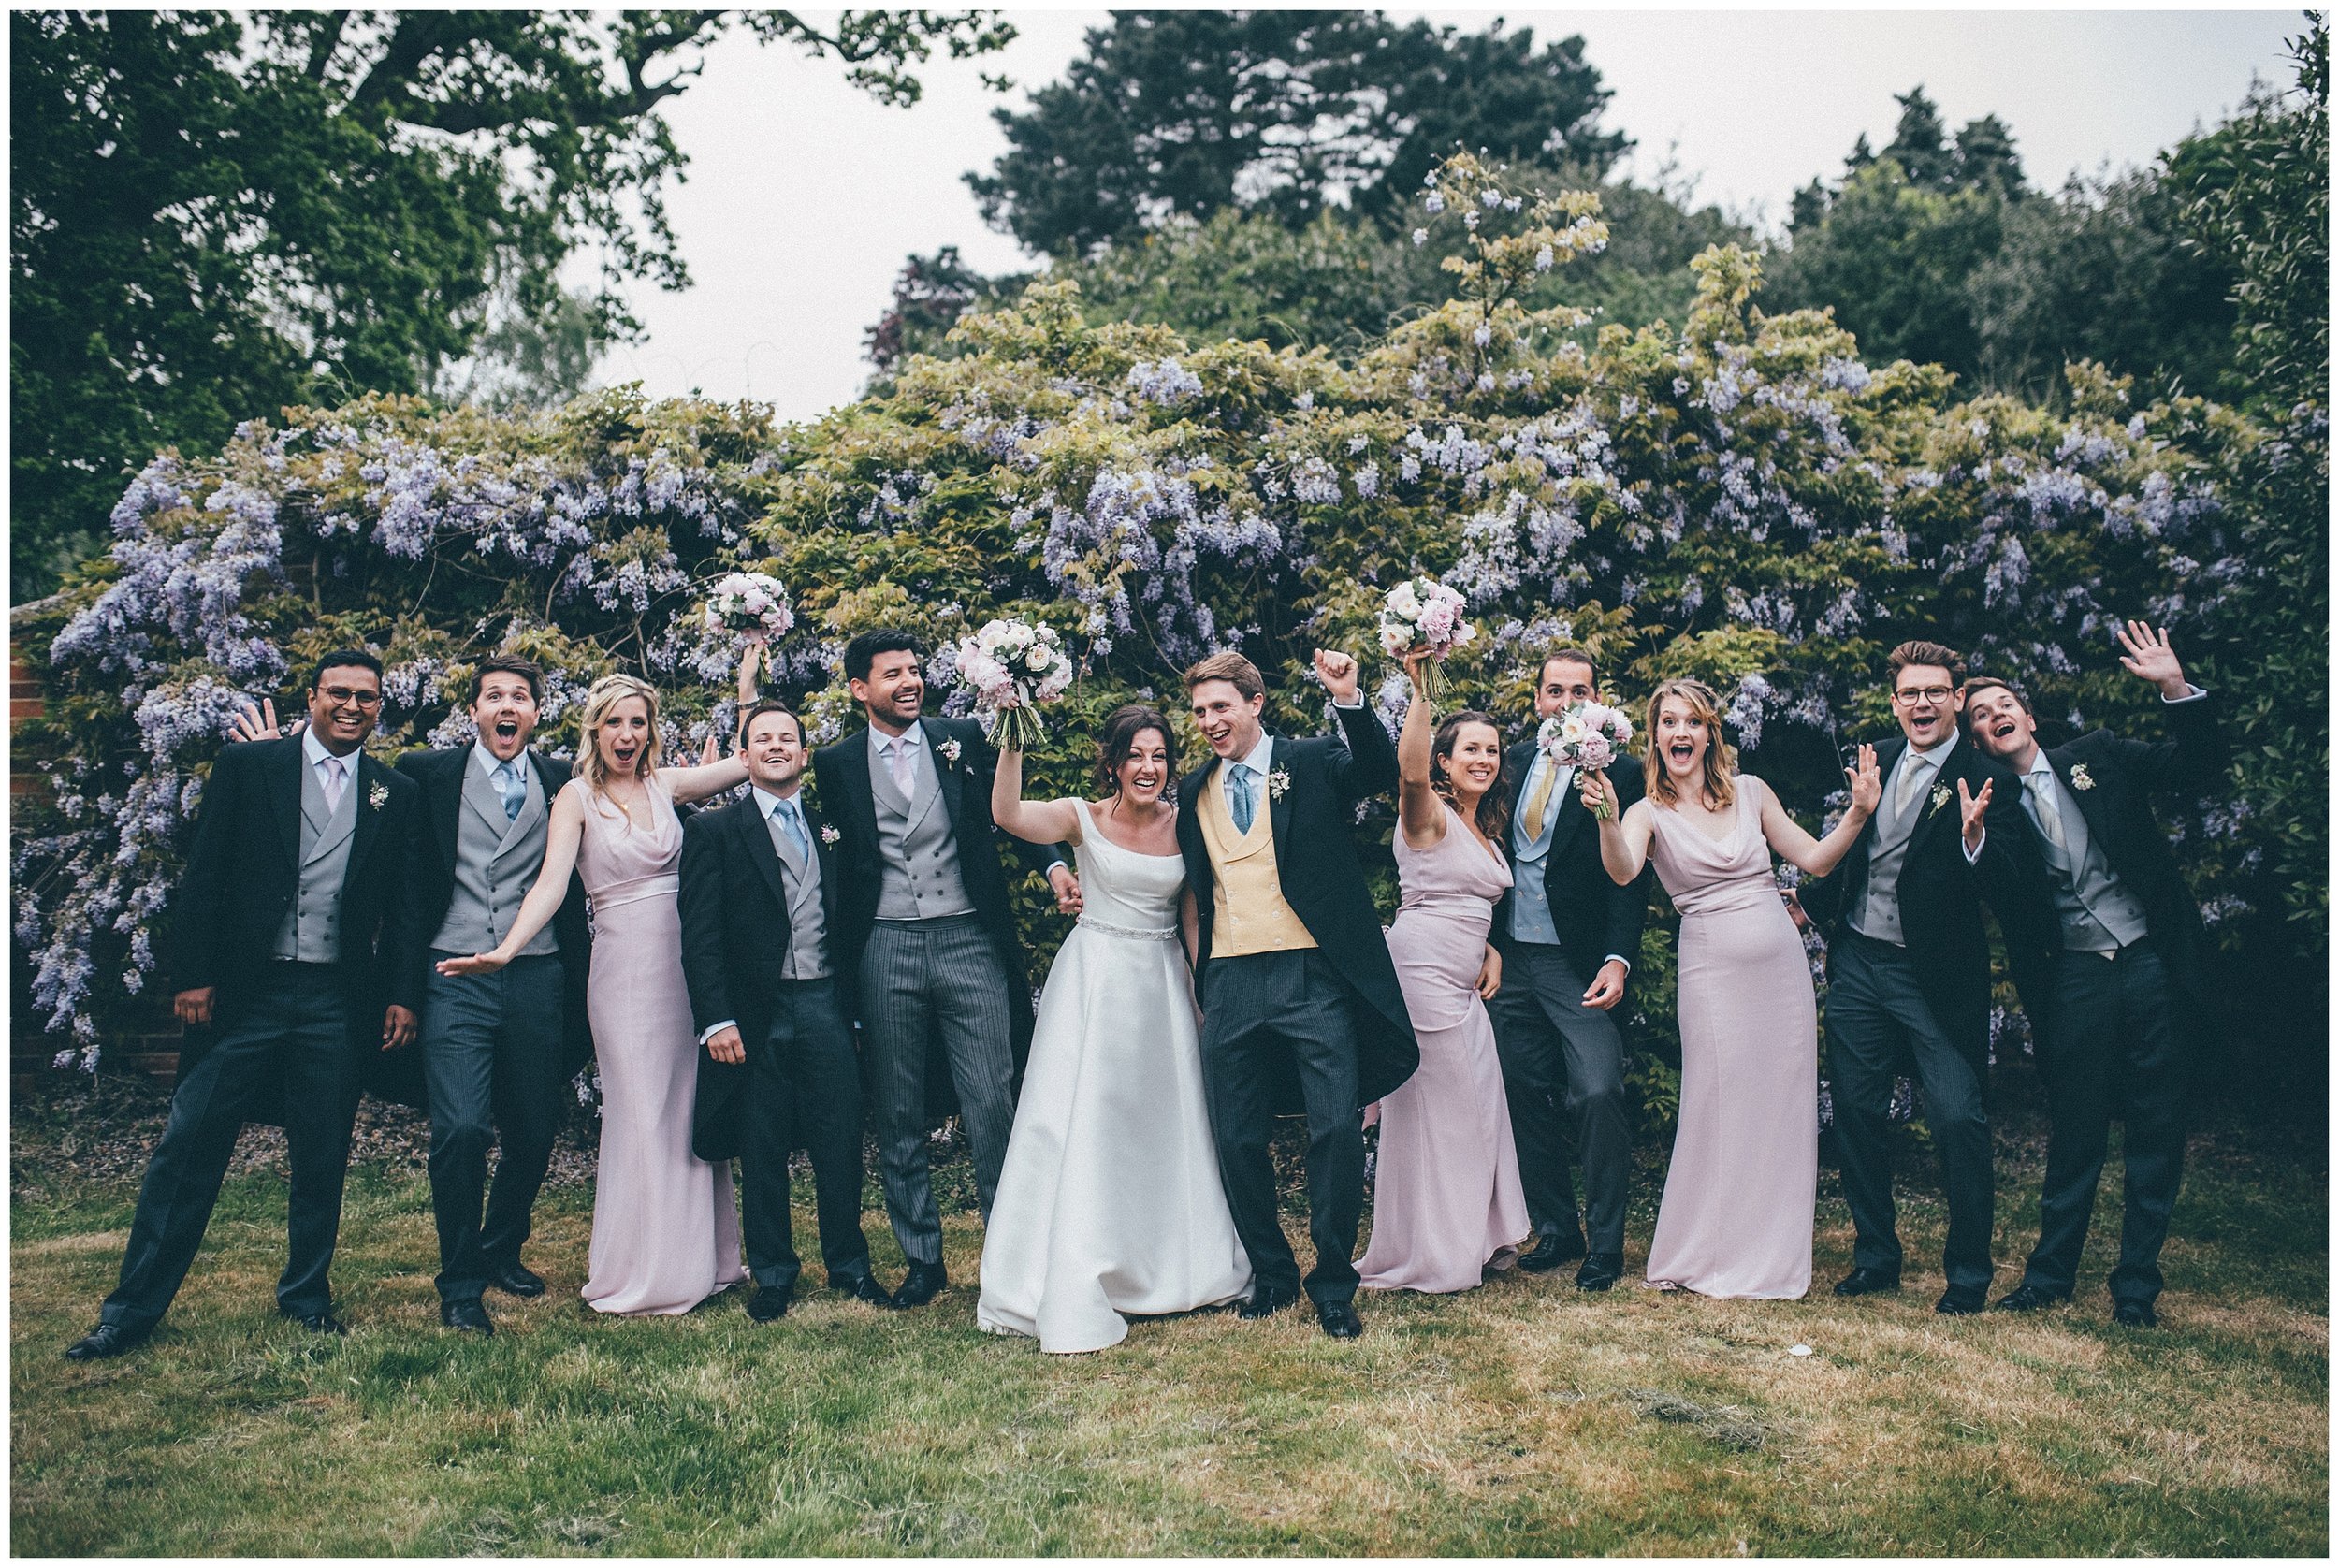 Bride and groom and their bridal party at Henham Park in Southwold.